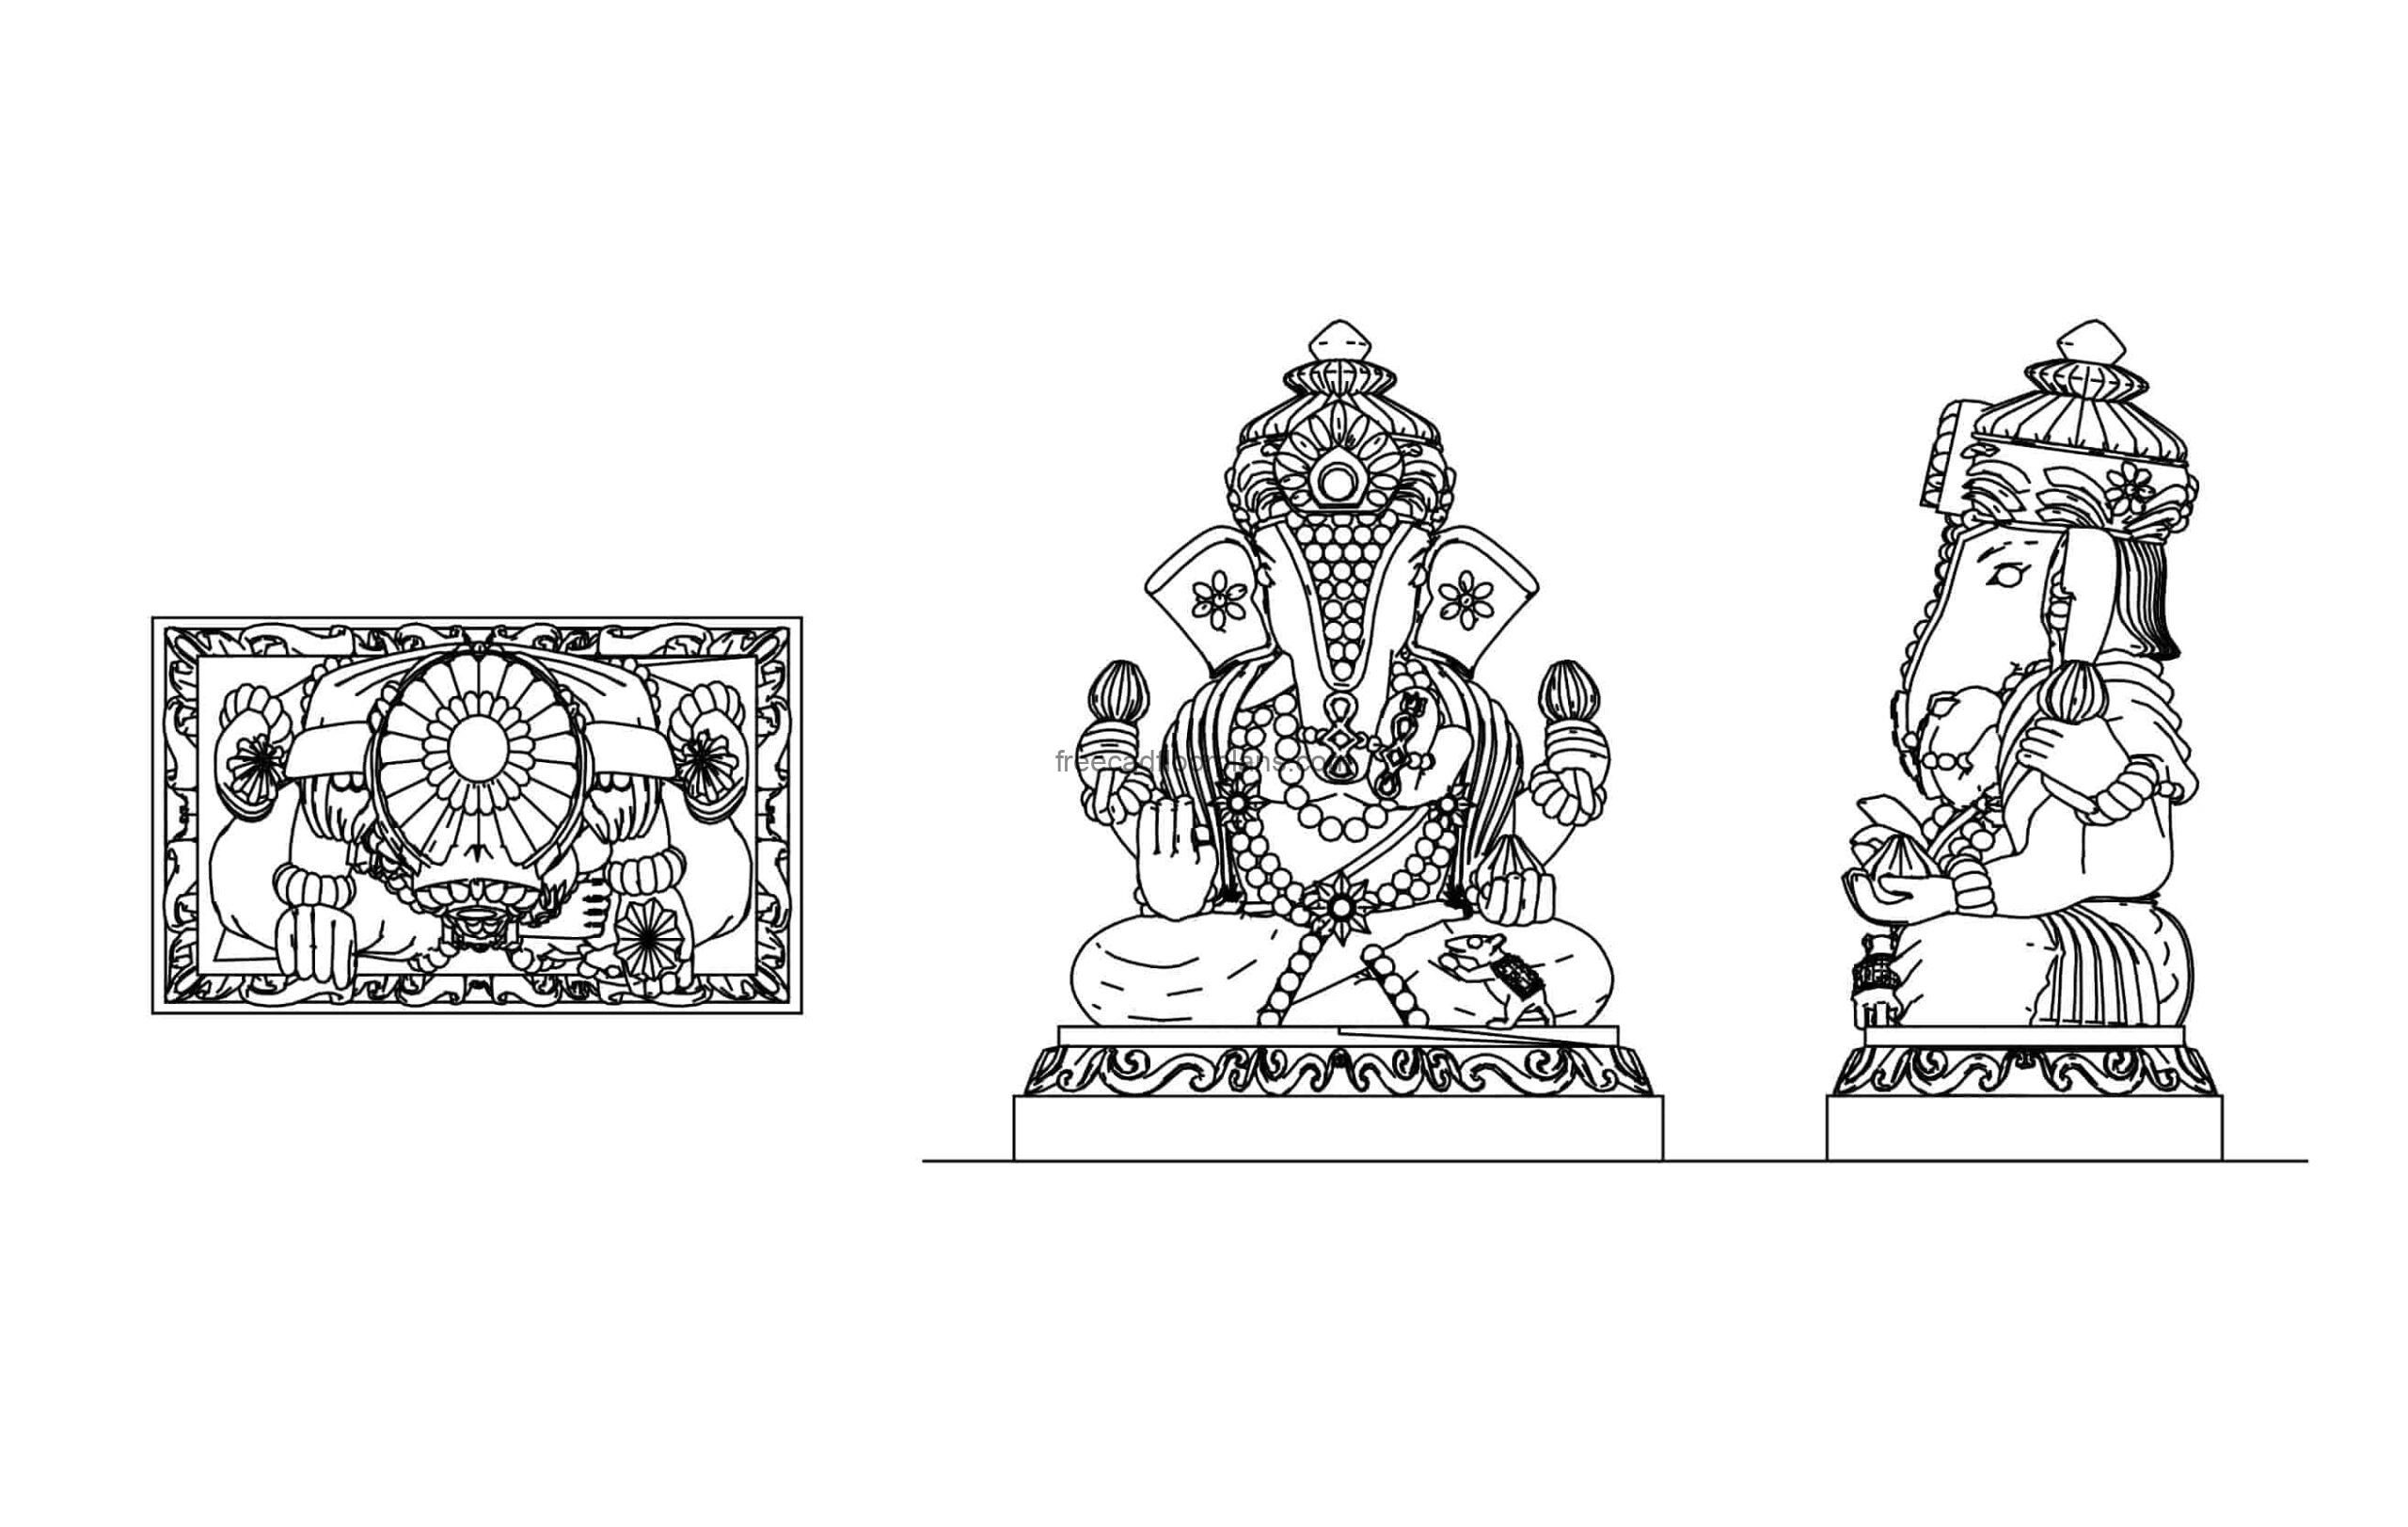 dwgcad block drawing of a ganesh ideol statue elevations and plan views file in dwg format for free download